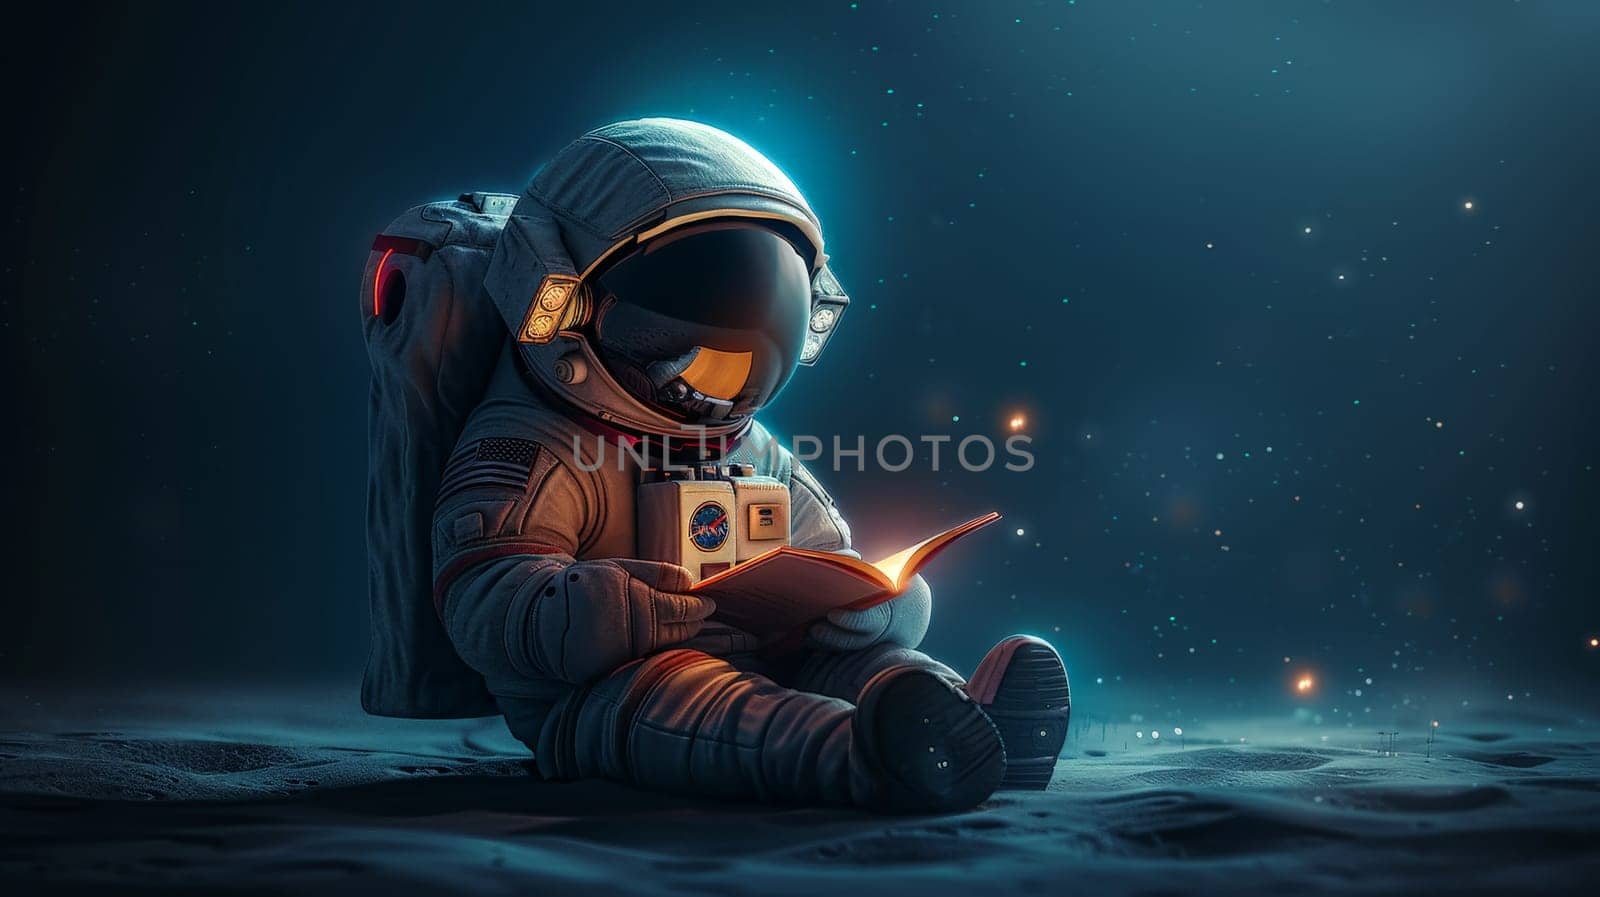 A cute little astronaut sitting and reading a book, Miniature astronaut reading a book.